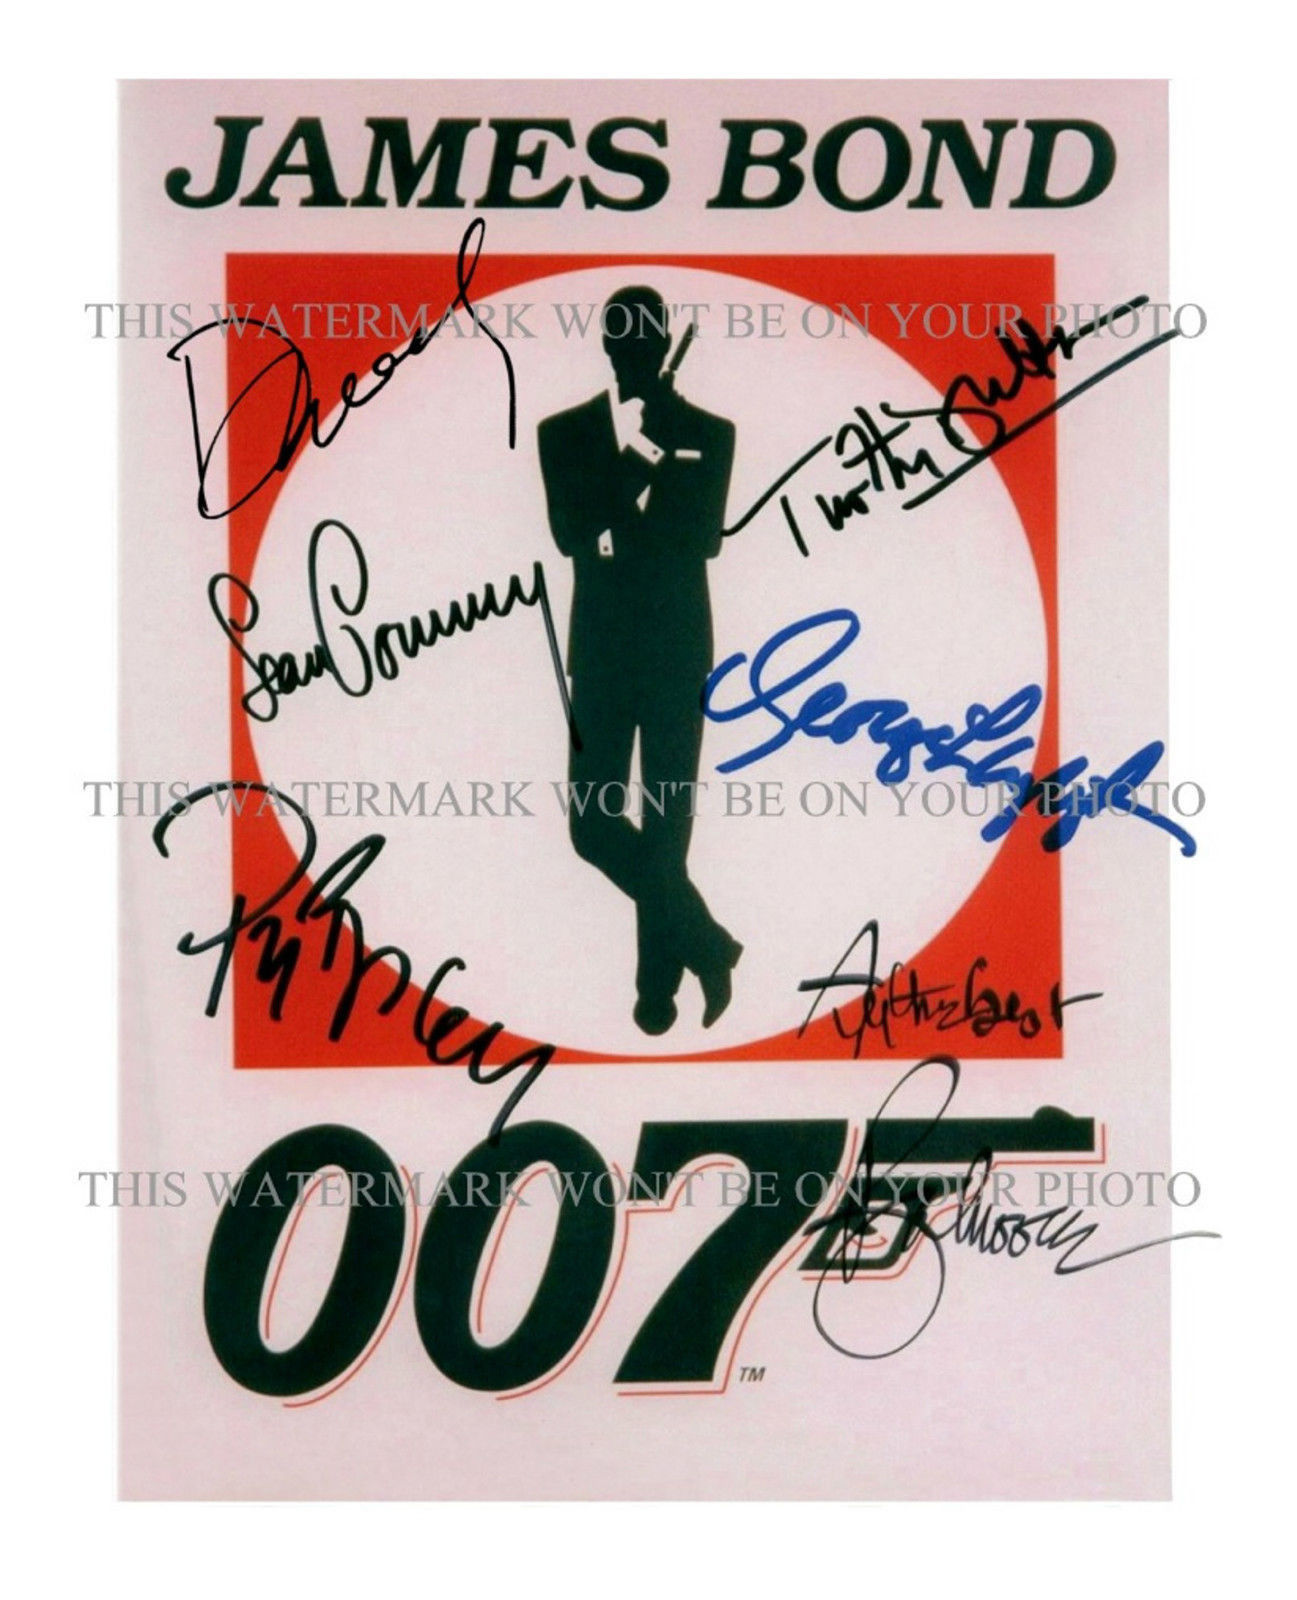 Primary image for 007 BOND SEAN CONNERY BROSNAN MOORE ALL JAMES BONDS SIGNED RP PHOTO DANIEL CRAIG